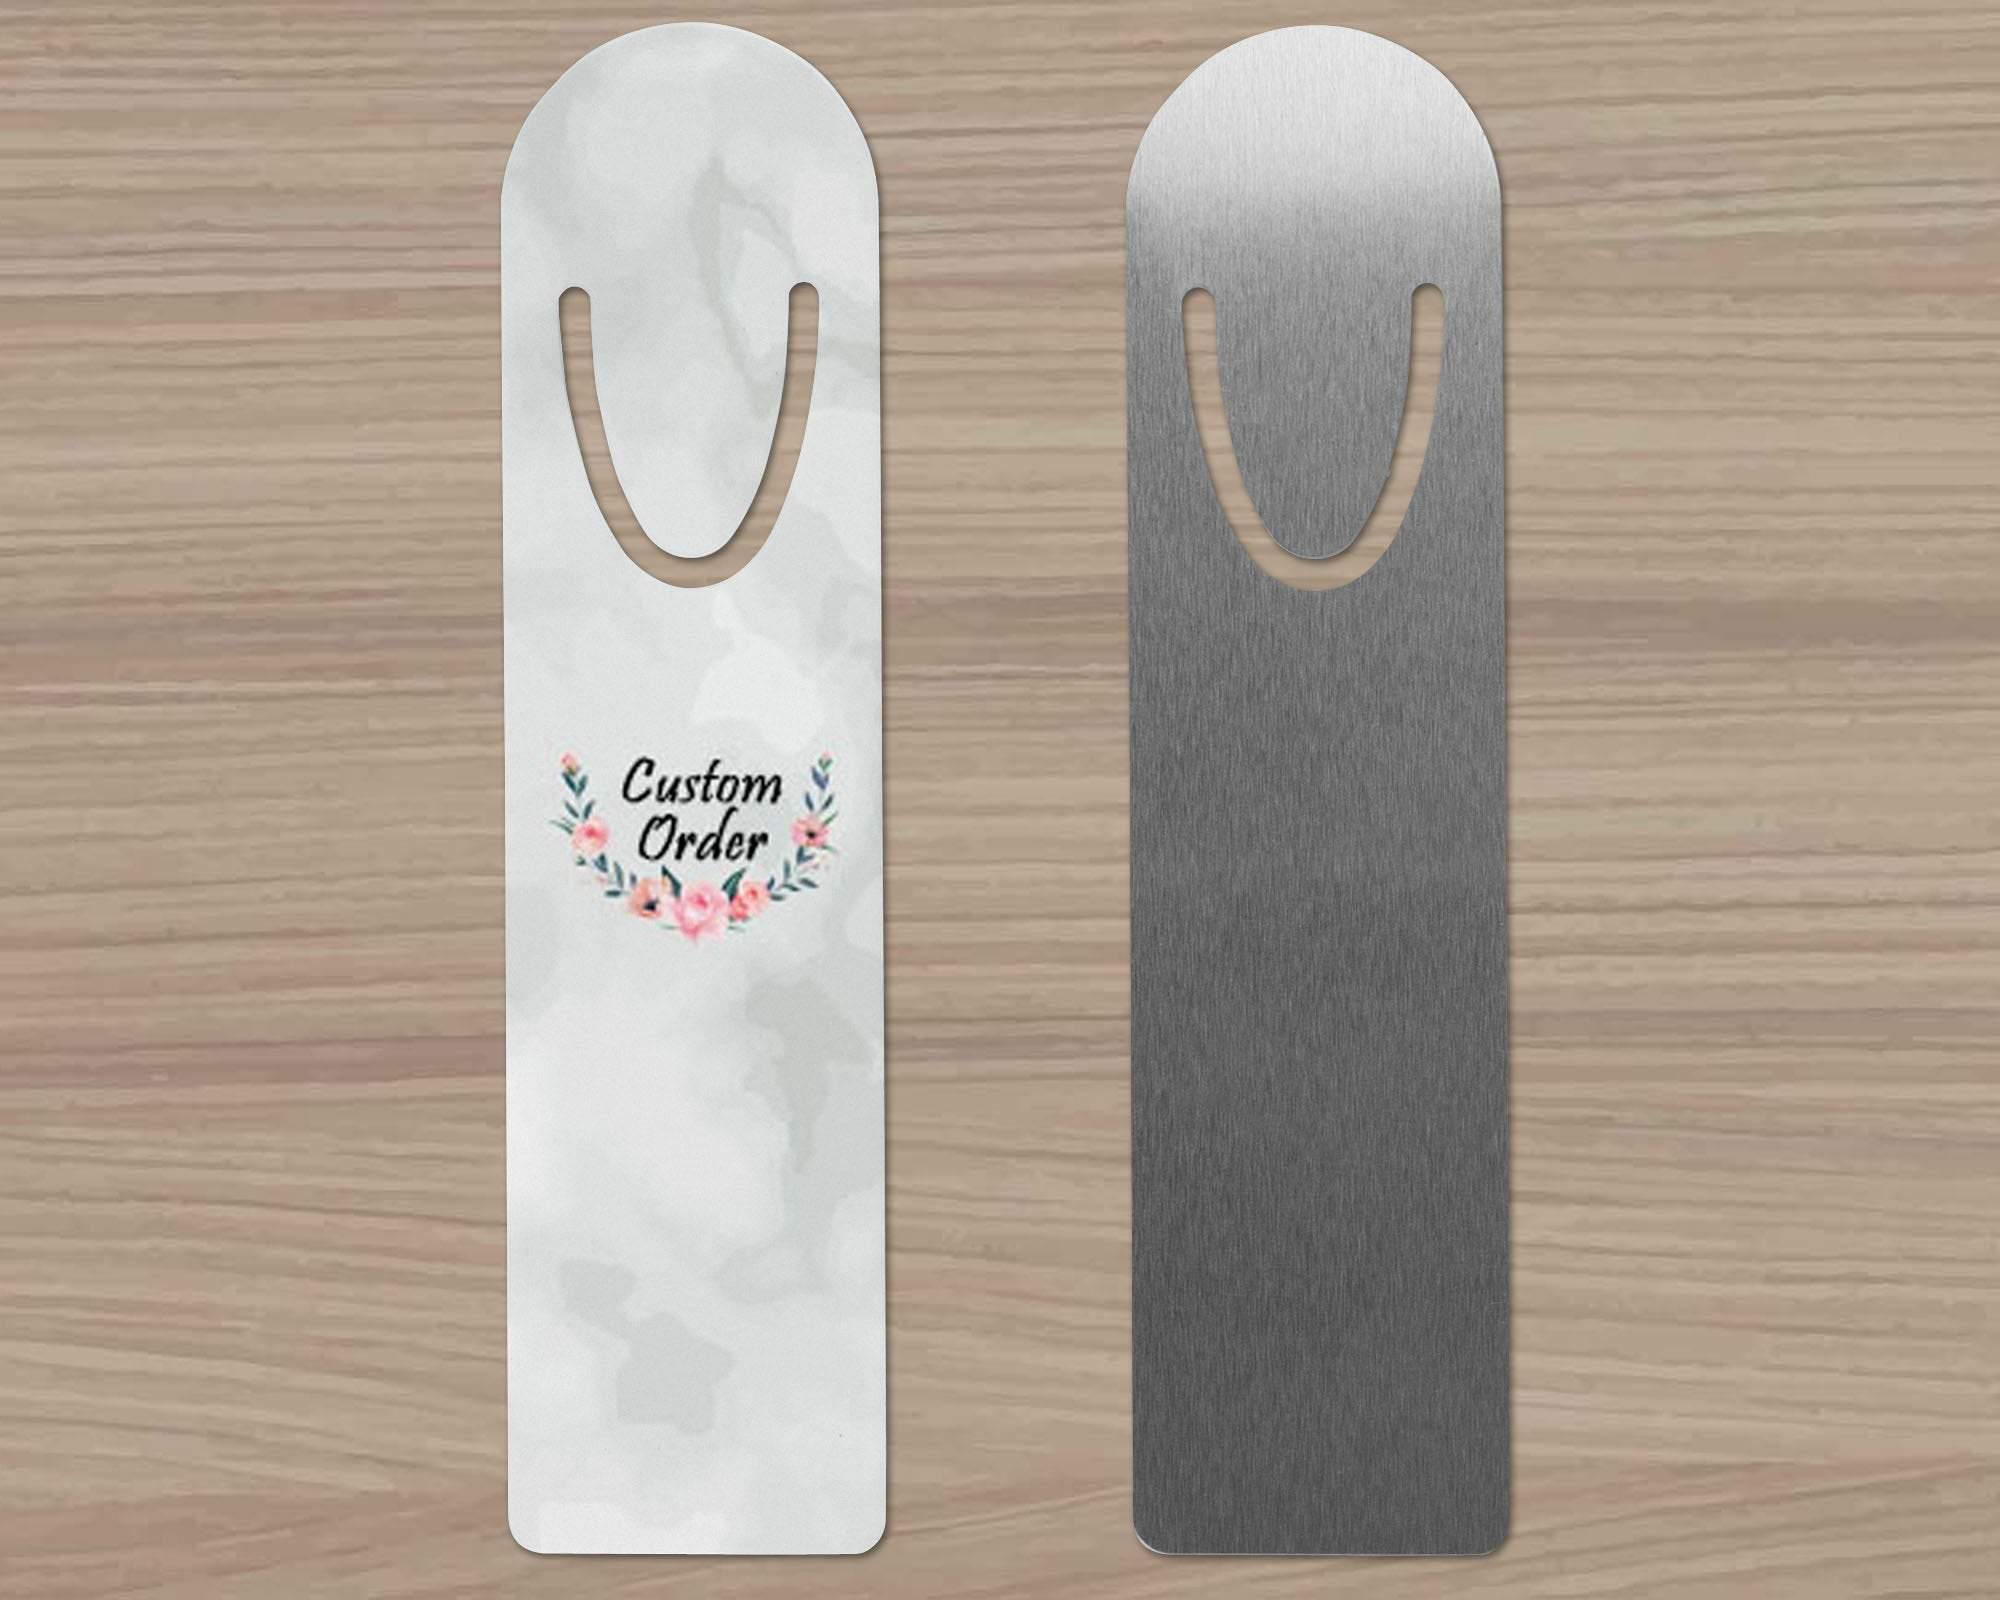 Customized Bookmarks | Personalized Office Accessories | Photo Bookmarks | Custom Order - This & That Solutions - Customized Bookmarks | Personalized Office Accessories | Photo Bookmarks | Custom Order - Personalized Gifts & Custom Home Decor